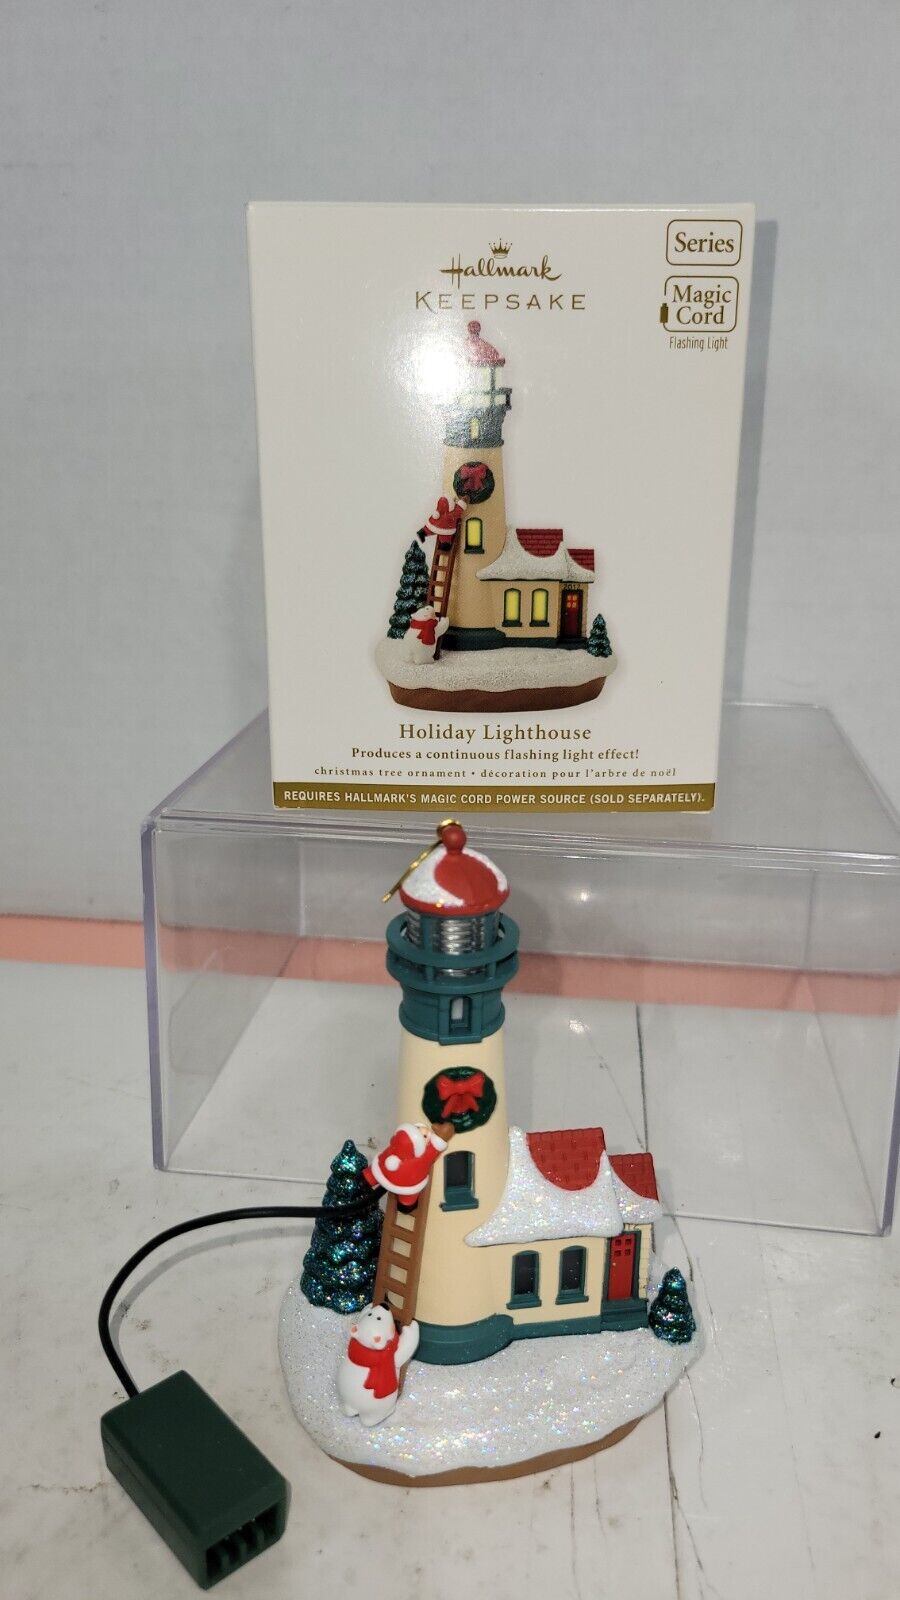 2012 Hallmark Holiday Lighthouse Magic Cord Christmas Ornament 1st In Series